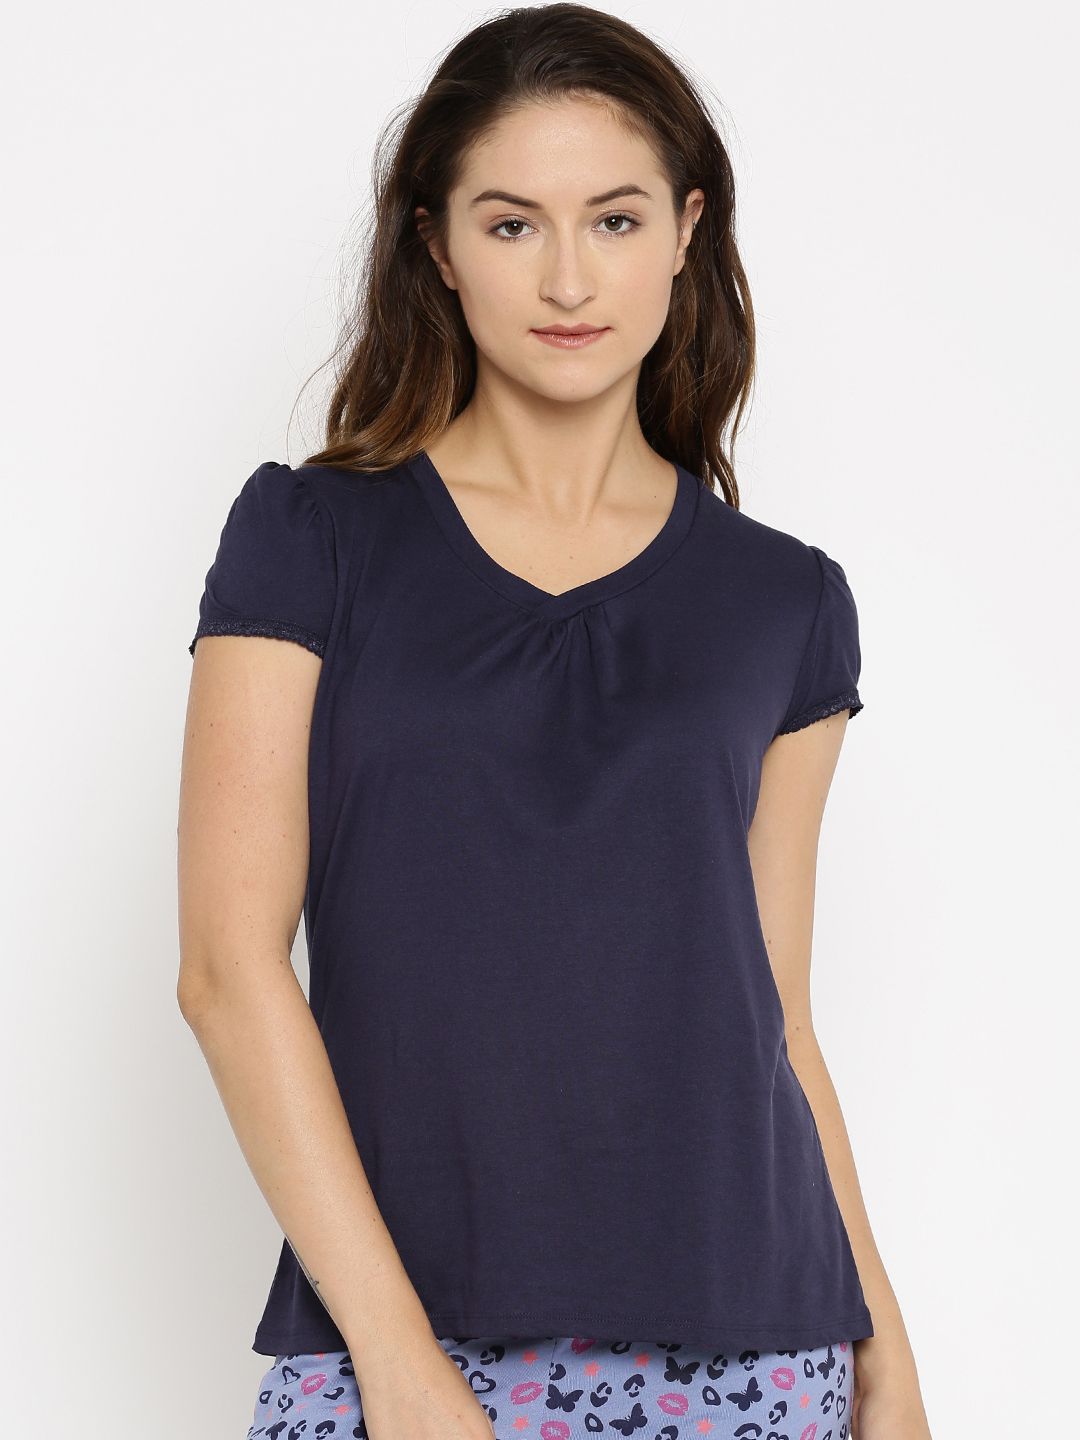 Jockey Woman Navy Lounge Top RX12-0105 Price in India